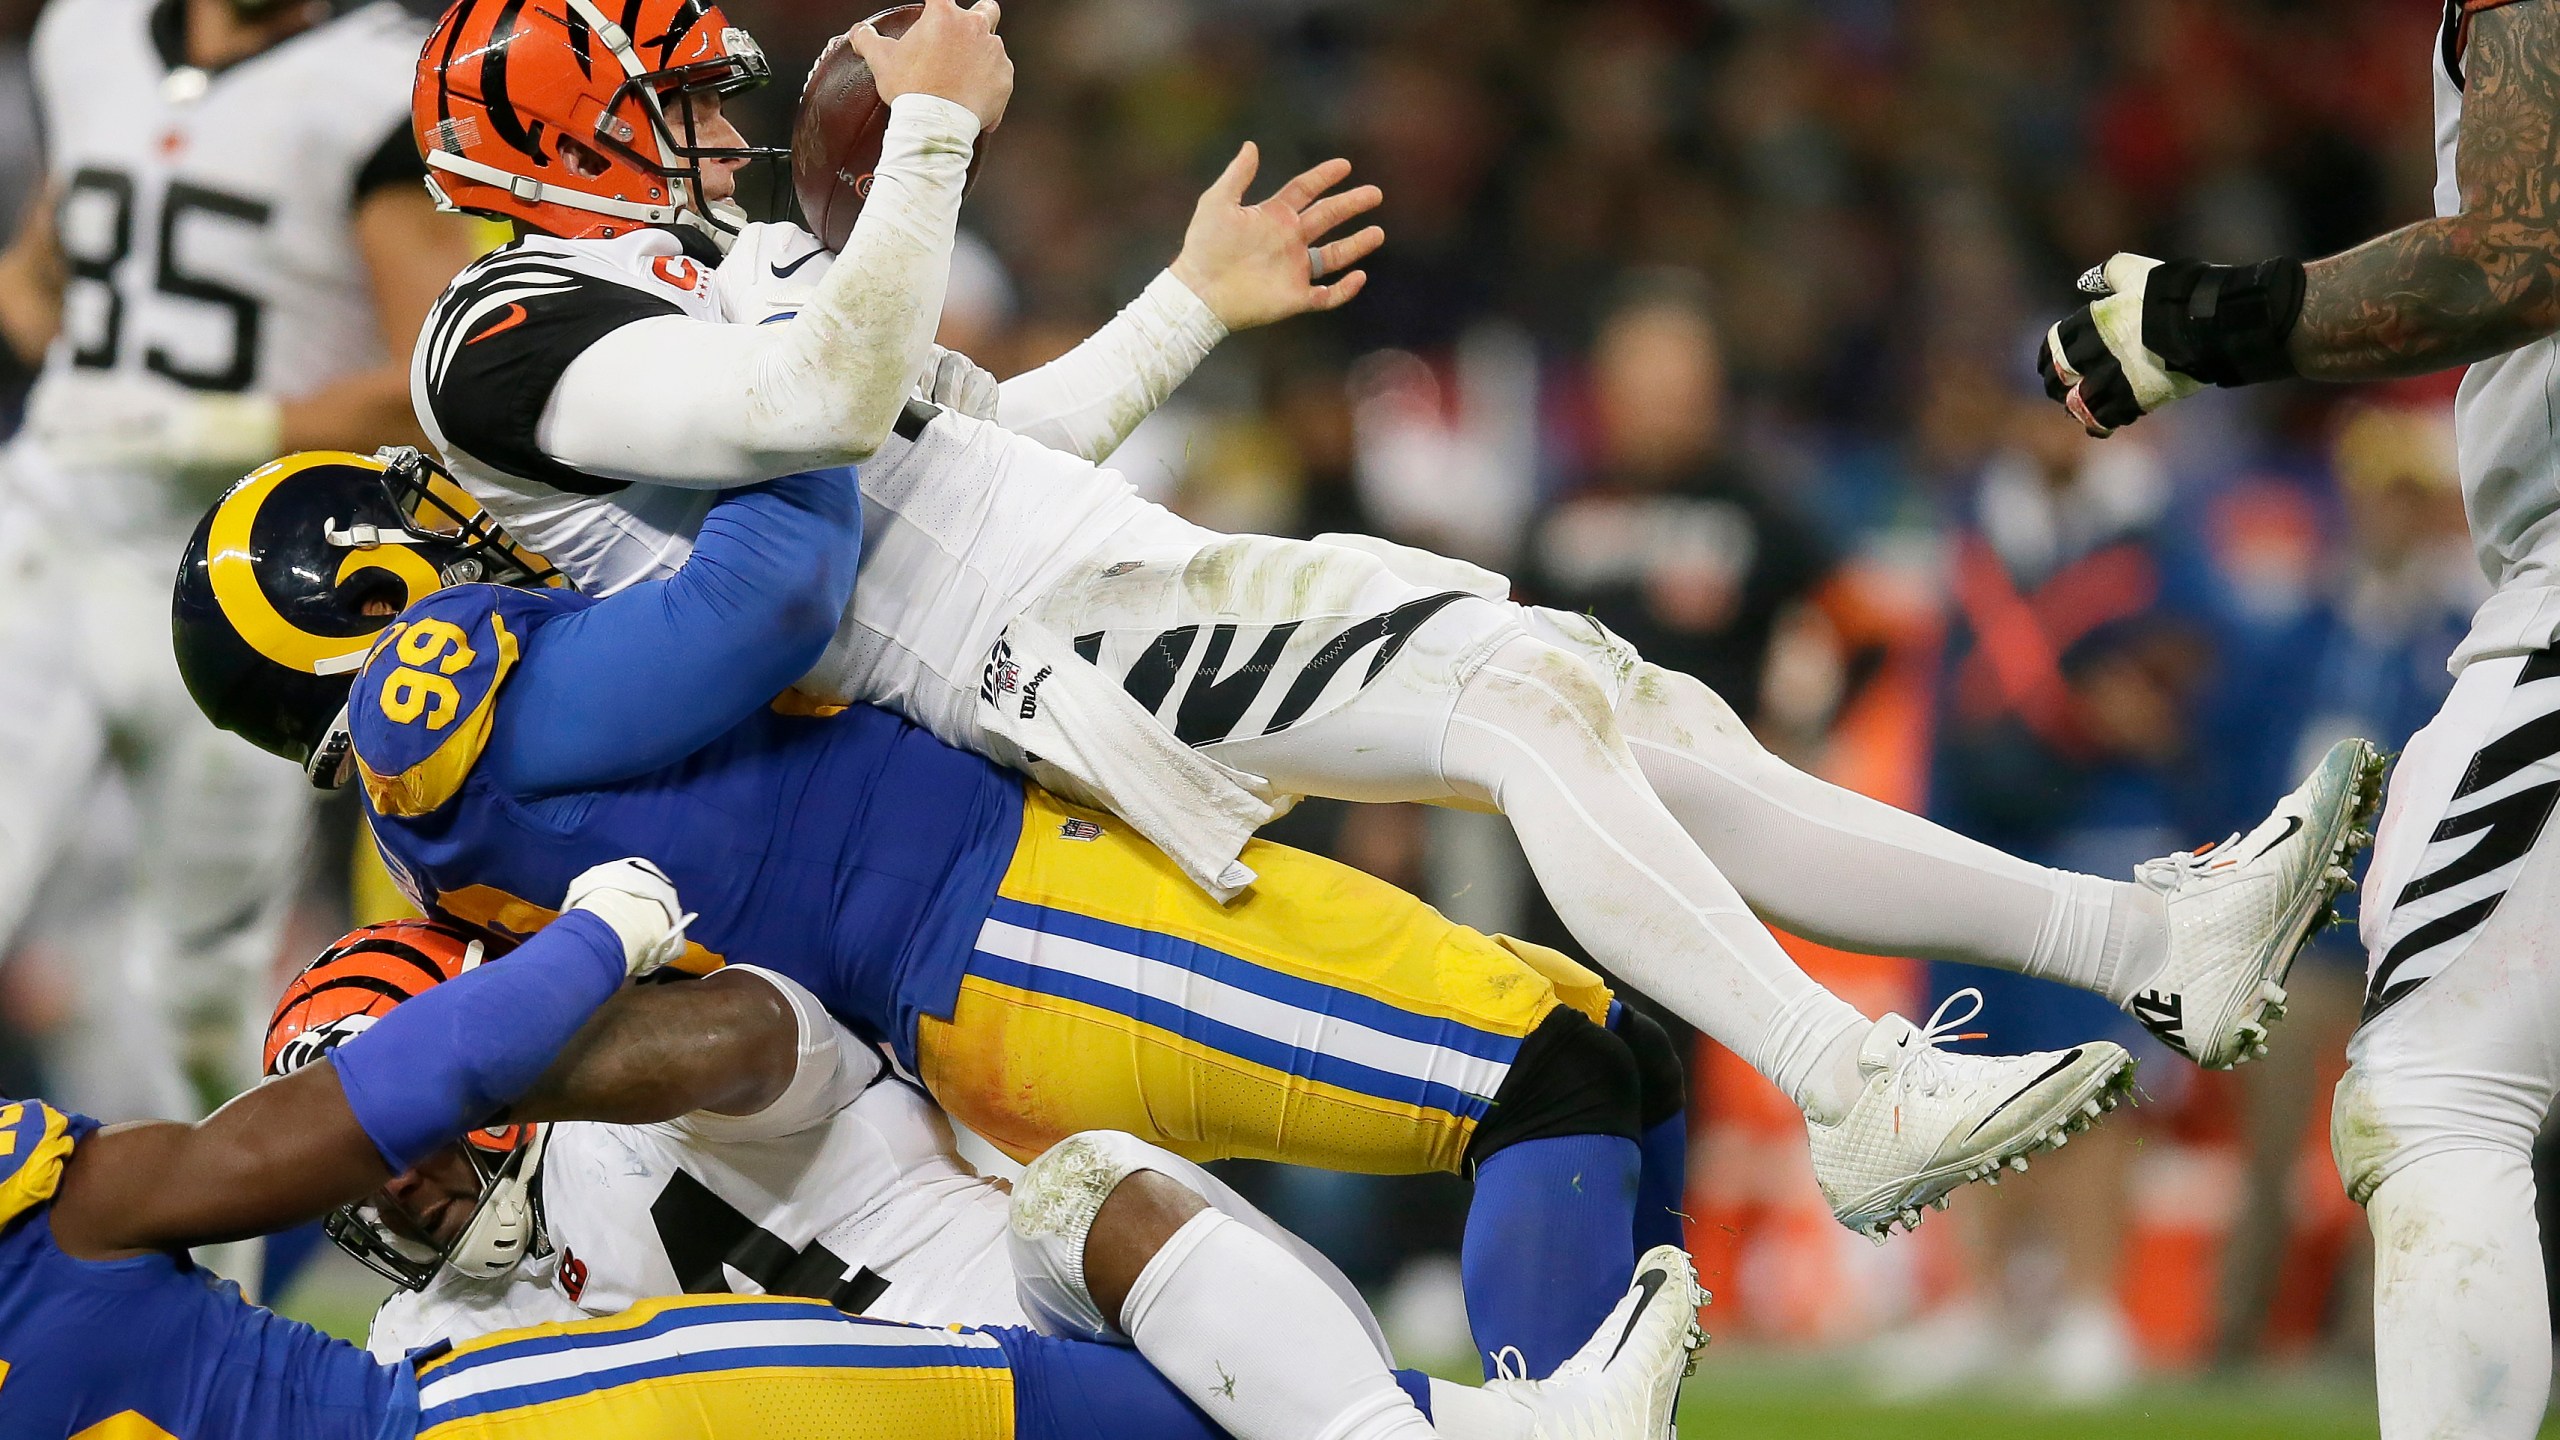 FILE - Cincinnati Bengals quarterback Andy Dalton, top, is sacked by Los Angeles Rams defensive tackle Aaron Donald during the second half of an NFL football game, Sunday, Oct. 27, 2019, at Wembley Stadium in London. Defensive lineman Aaron Donald has announced his retirement after a standout 10-year career with the Los Angeles Rams. The three-time AP NFL Defensive Player of the Year made his surprising announcement on social media Friday, March 15, 2024. (AP Photo/Tim Ireland, File)